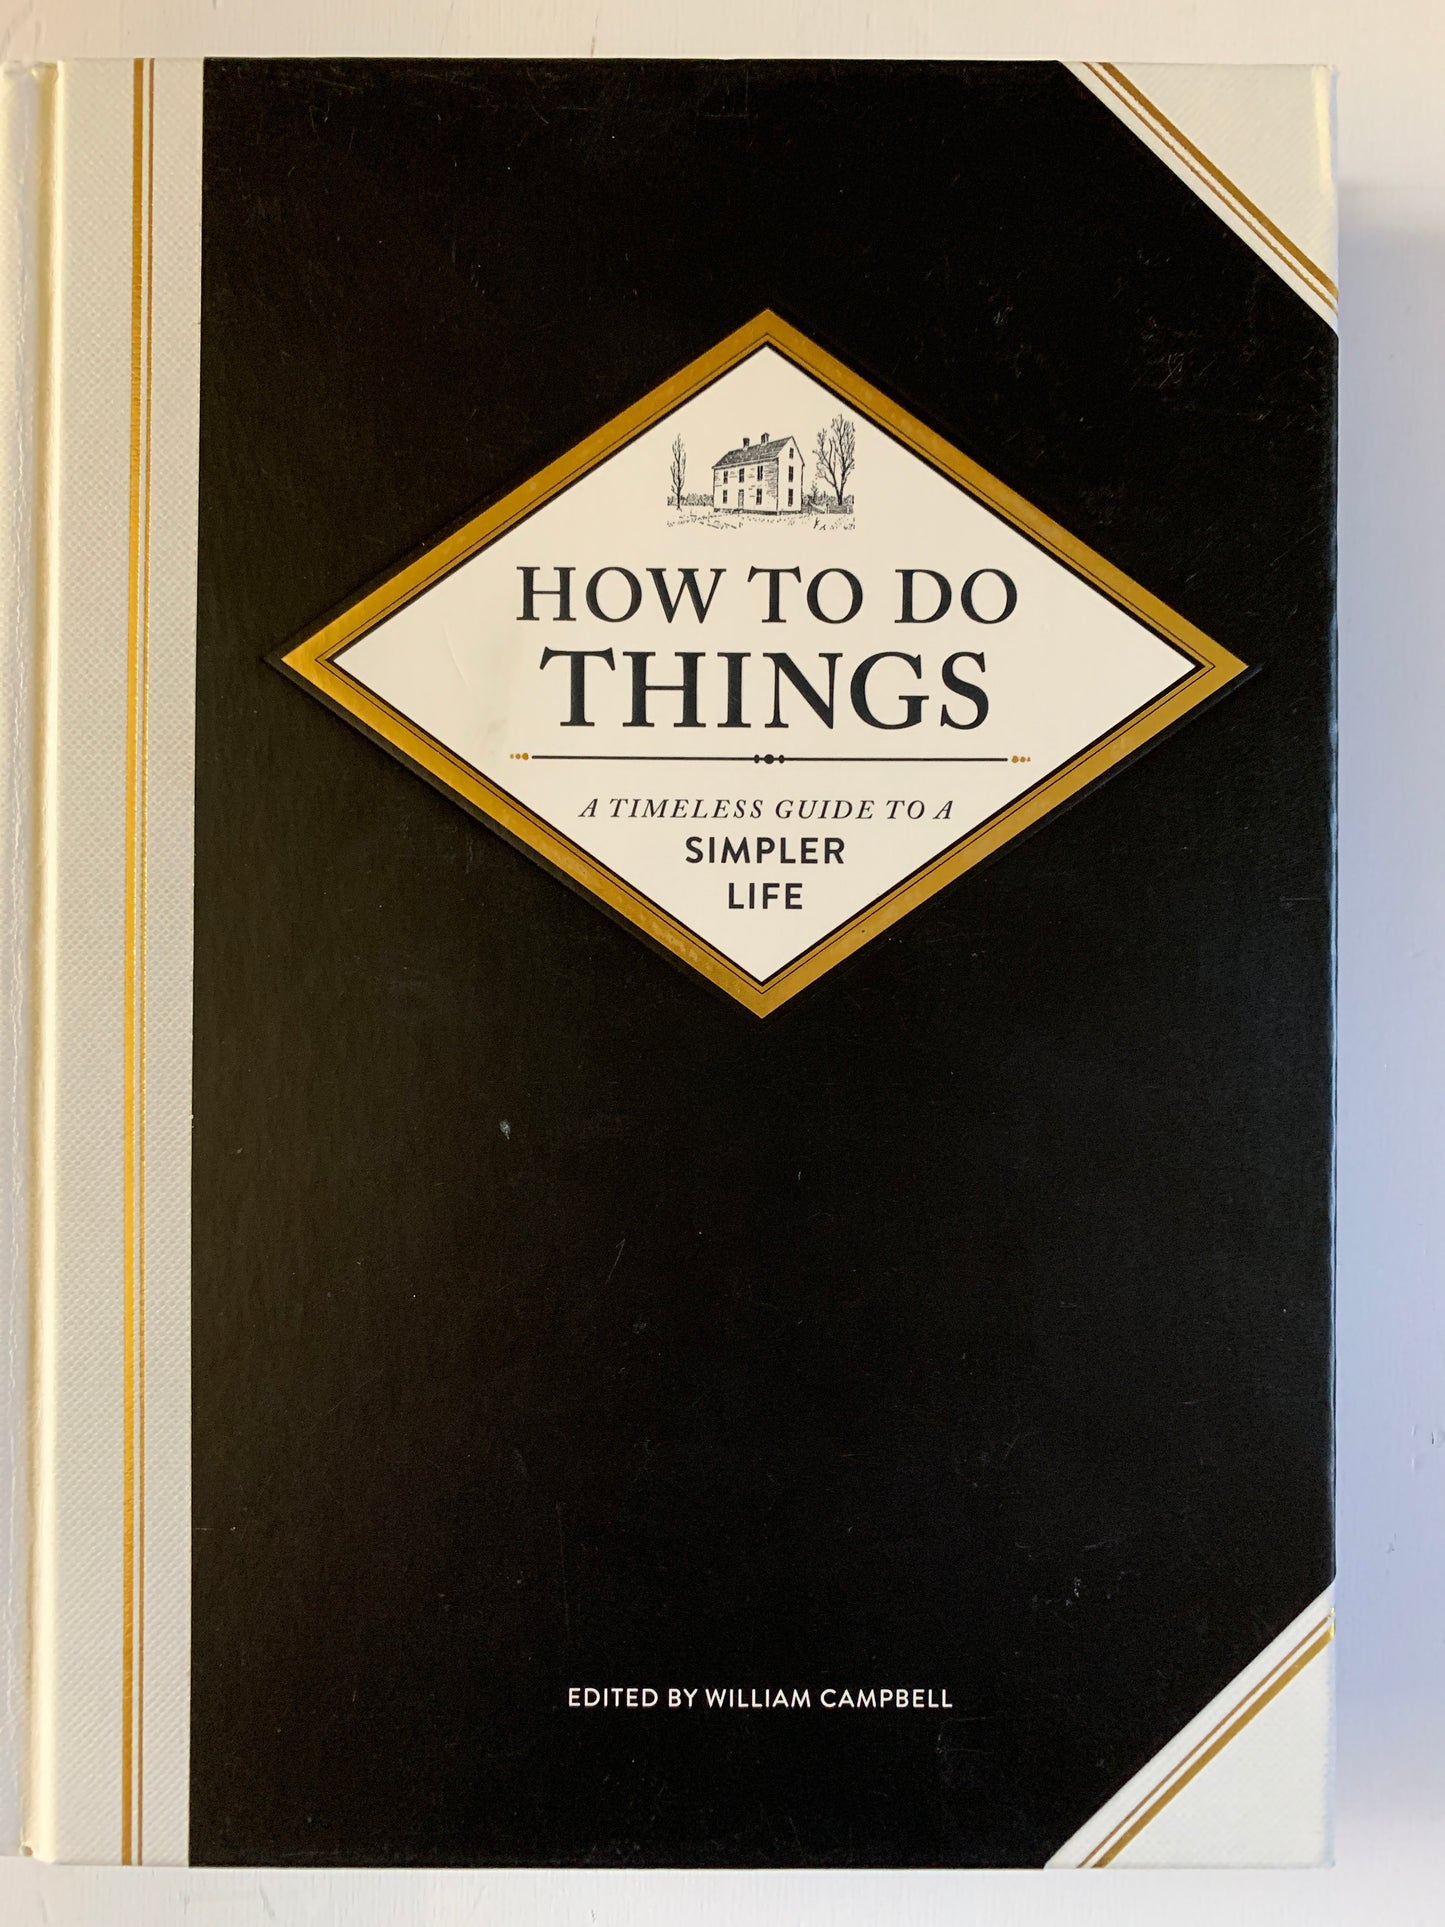 How to do Things: A Timeless Guide to a Simpler Life